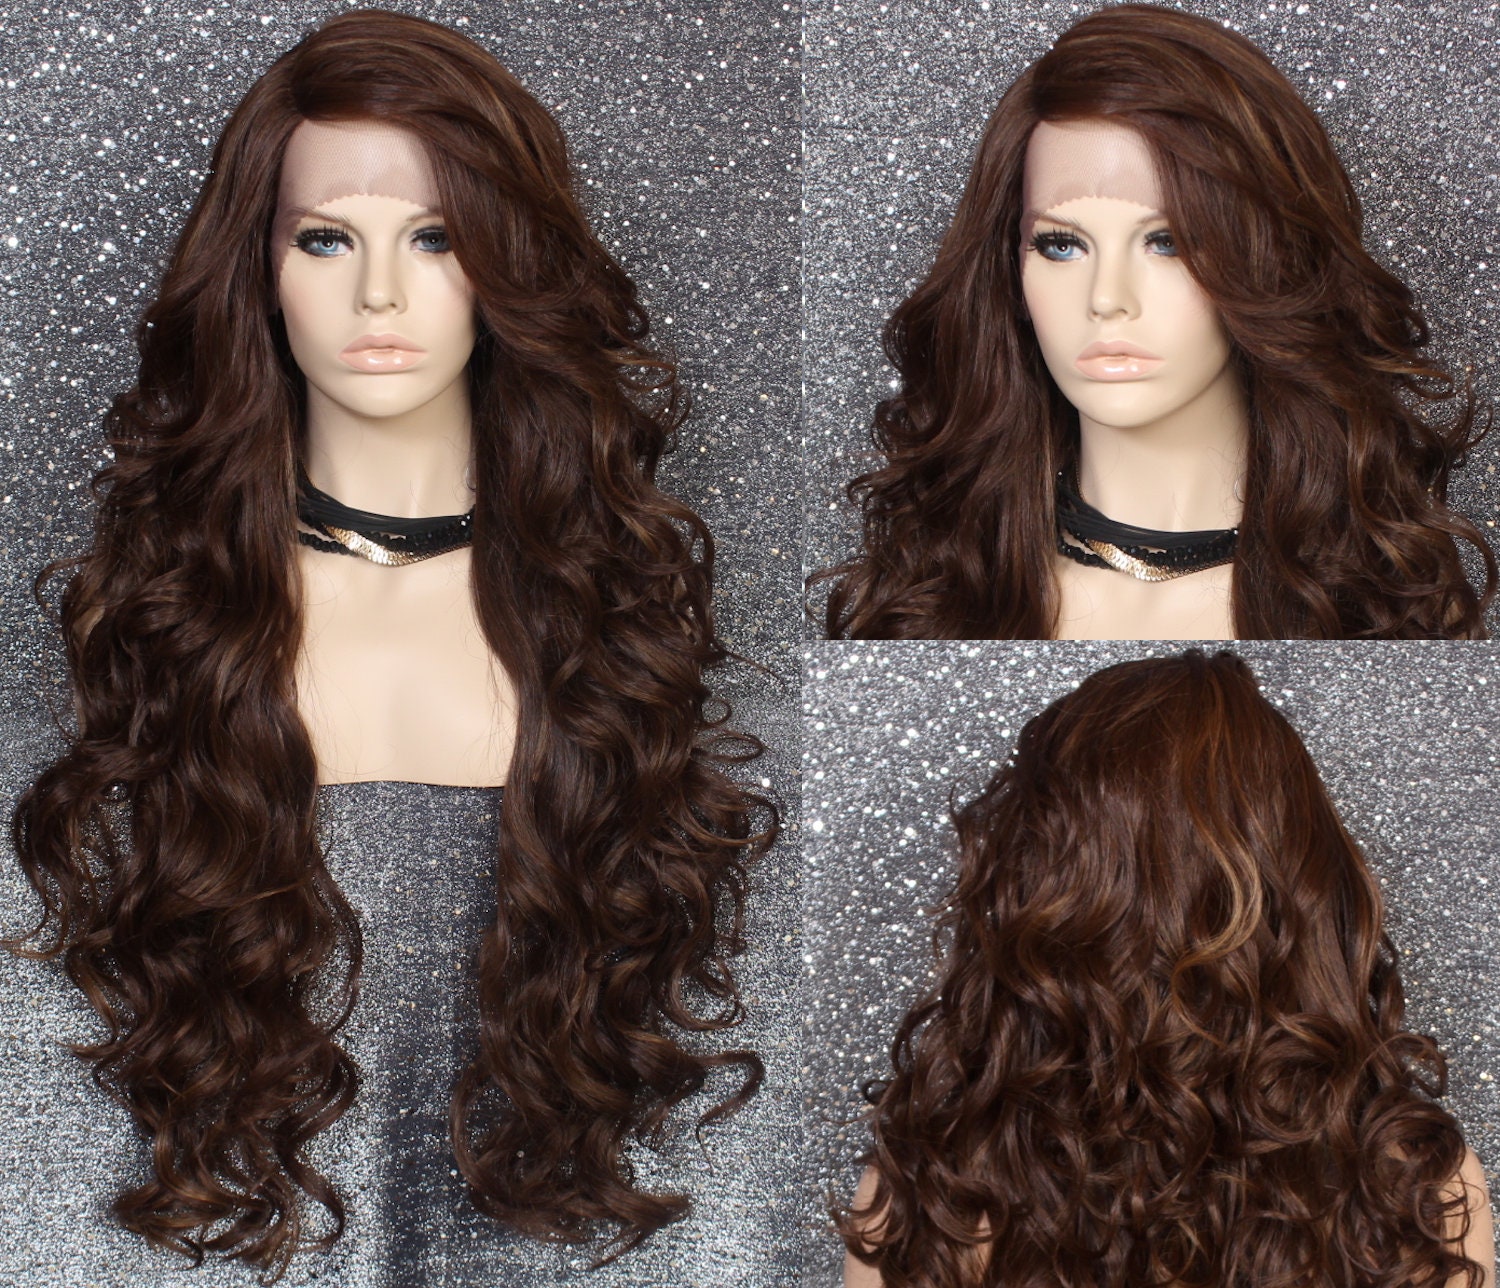 Extra Long Human Hair Blend Lace Front Wig 38 Curly Brown Auburn Carmel Mix Heat Safe Cancer/Alopecia/Theater/Cosplay/Club